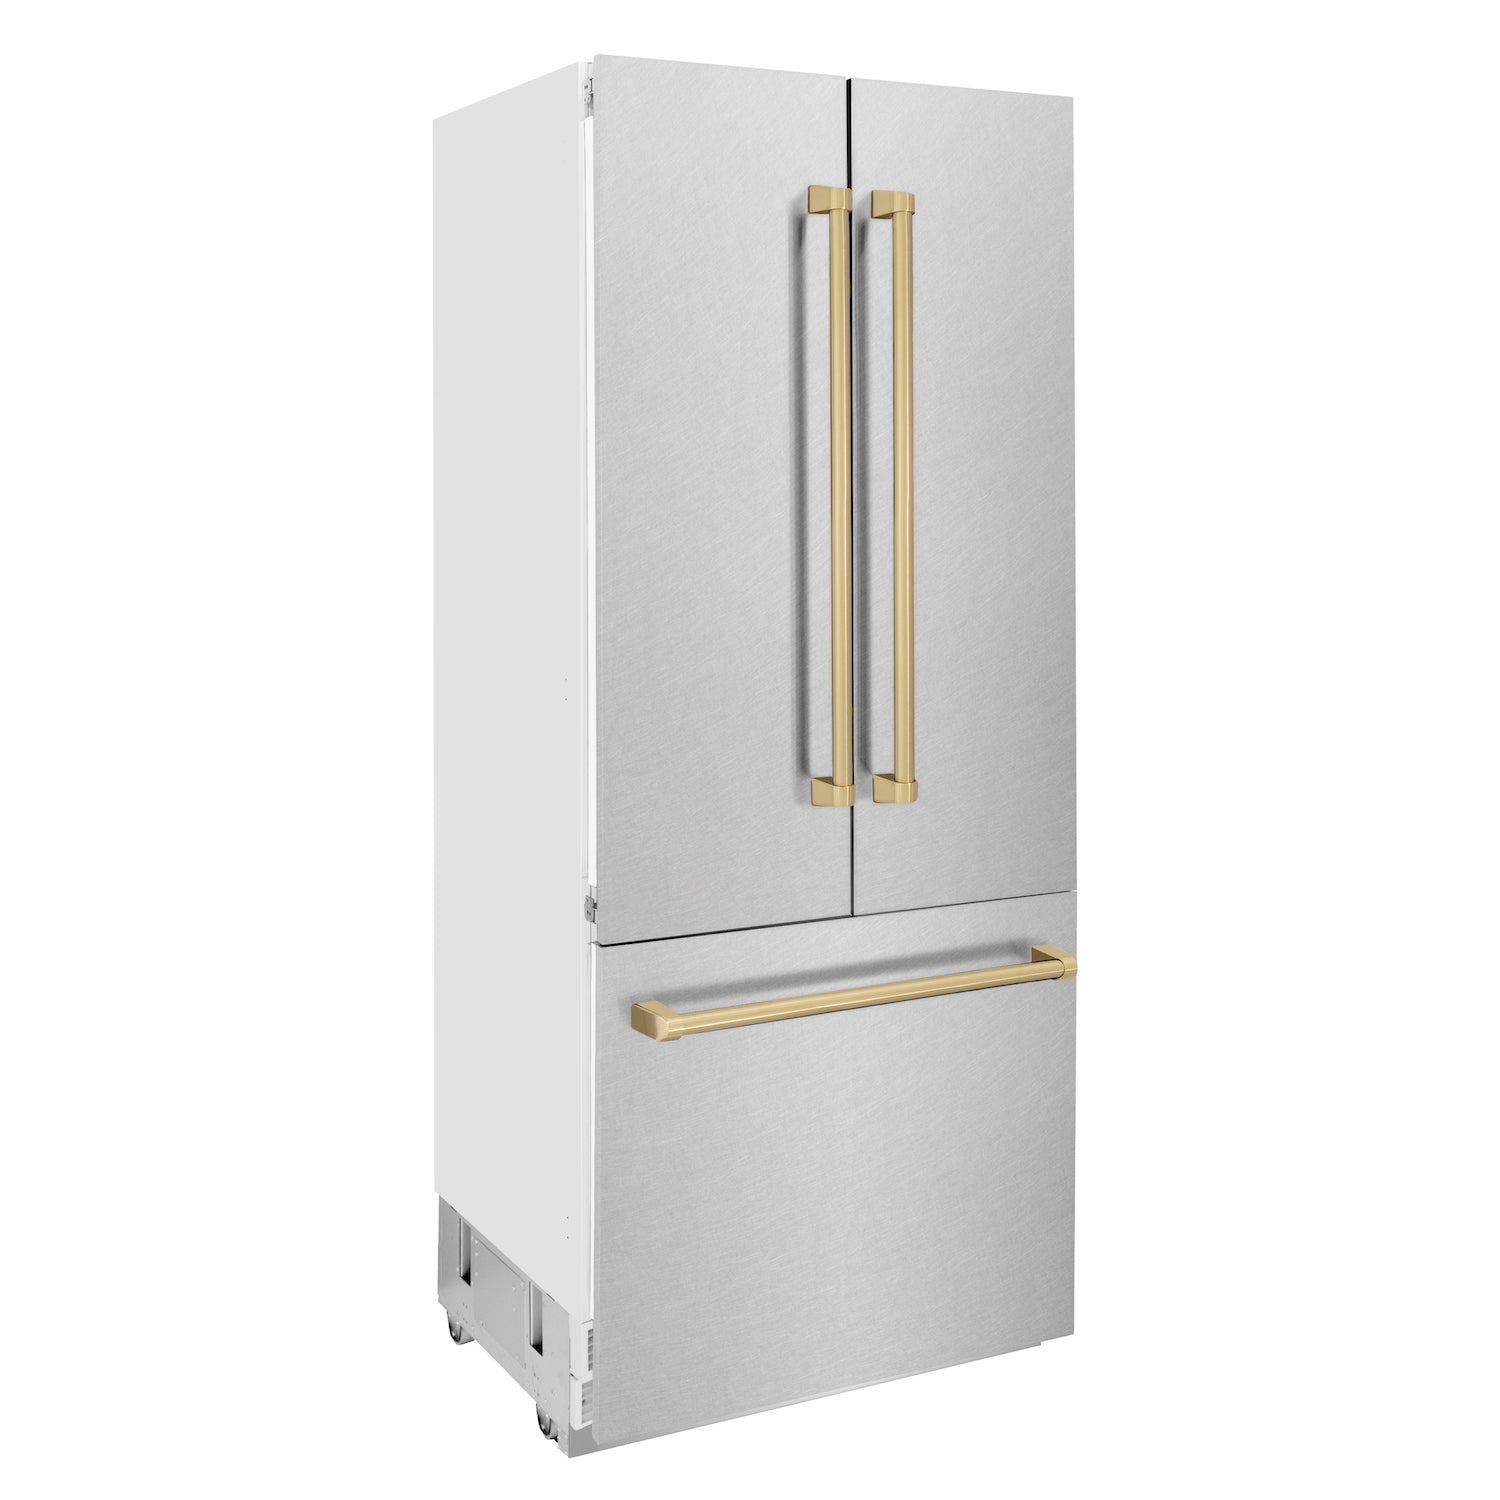 ZLINE Autograph Edition 36 in. 19.6 cu. ft. Built-in 2-Door Bottom Freezer Refrigerator with Internal Water and Ice Dispenser in Fingerprint Resistant Stainless Steel with Champagne Bronze Accents (RBIVZ-SN-36-CB) side, closed.